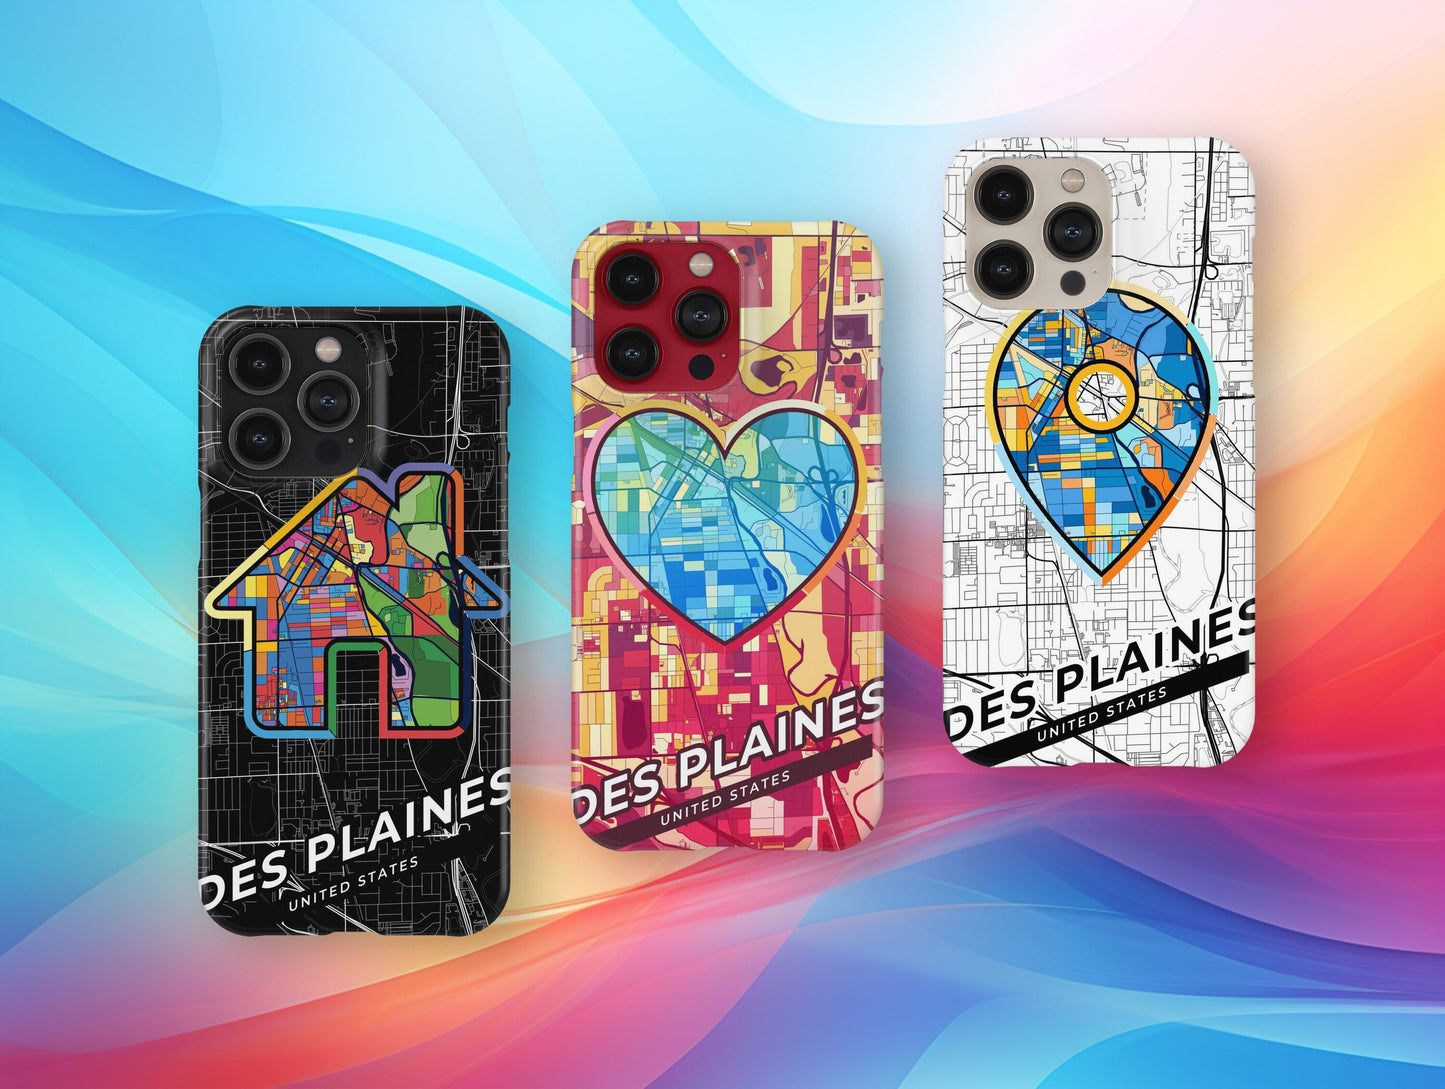 Des Plaines Illinois slim phone case with colorful icon. Birthday, wedding or housewarming gift. Couple match cases.